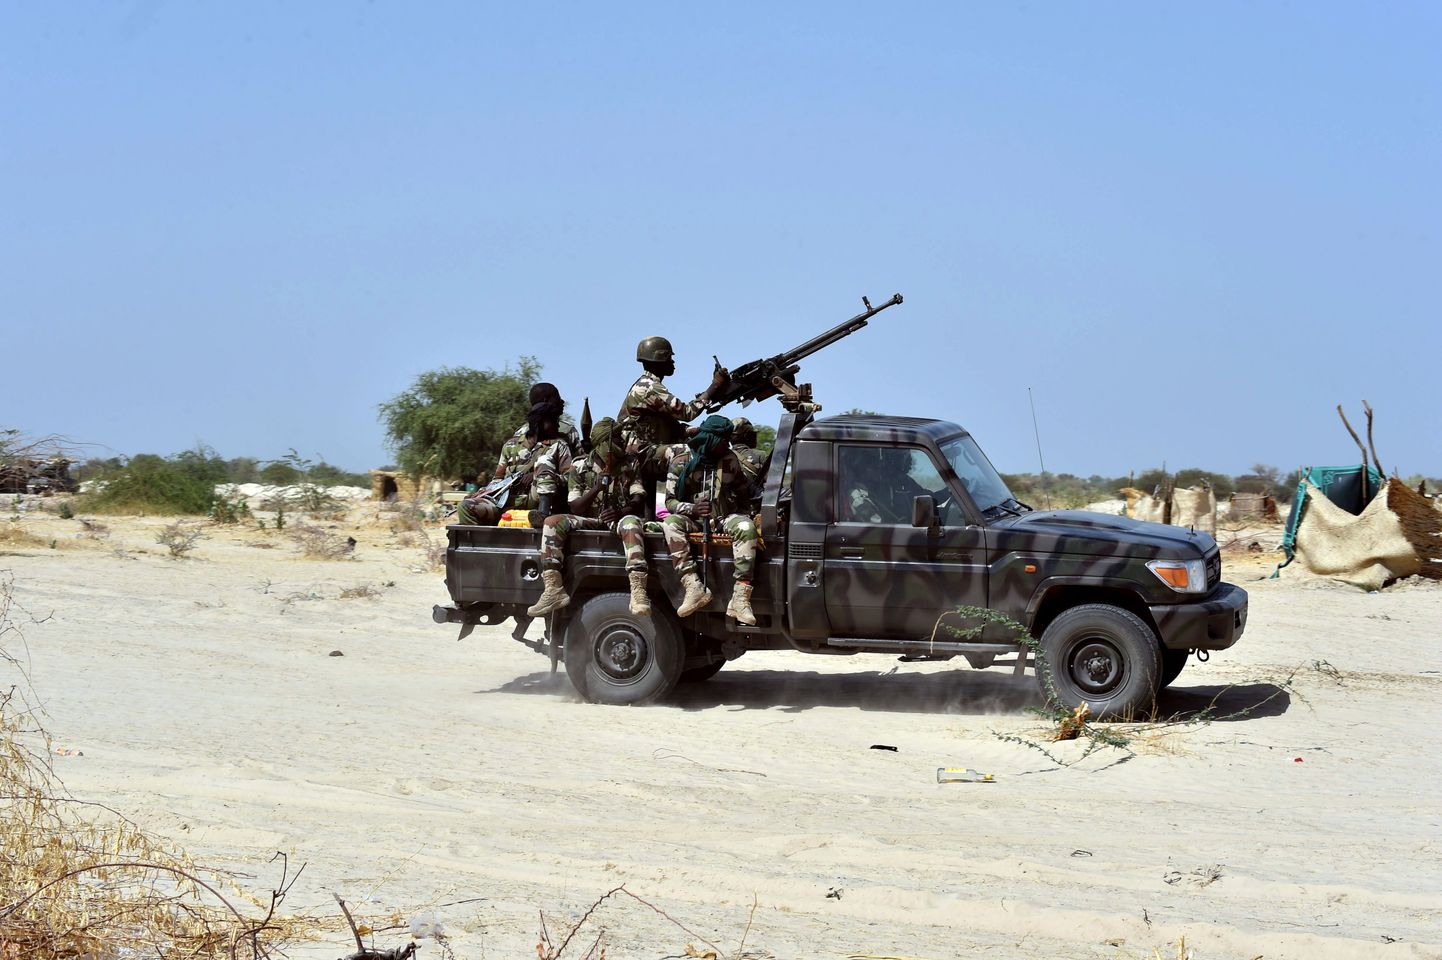 Niger soldiers ride in a military vehicle on May 25, 2015 in Malam Fatori, in northern Nigeria, near the border with Niger, where the Niger and Chadian army troops are working together in support of Nigerian forces, to fight the Boko Haram Islamist group. Boko Haram, which wants to create a hardline Islamic state in northeast Nigeria, has been pushed out of captured towns including Malam Fatori, and territory, since February by Nigerian troops with assistance from Niger, Chad and Cameroon. AFP PHOTO / ISSOUF SANOGO